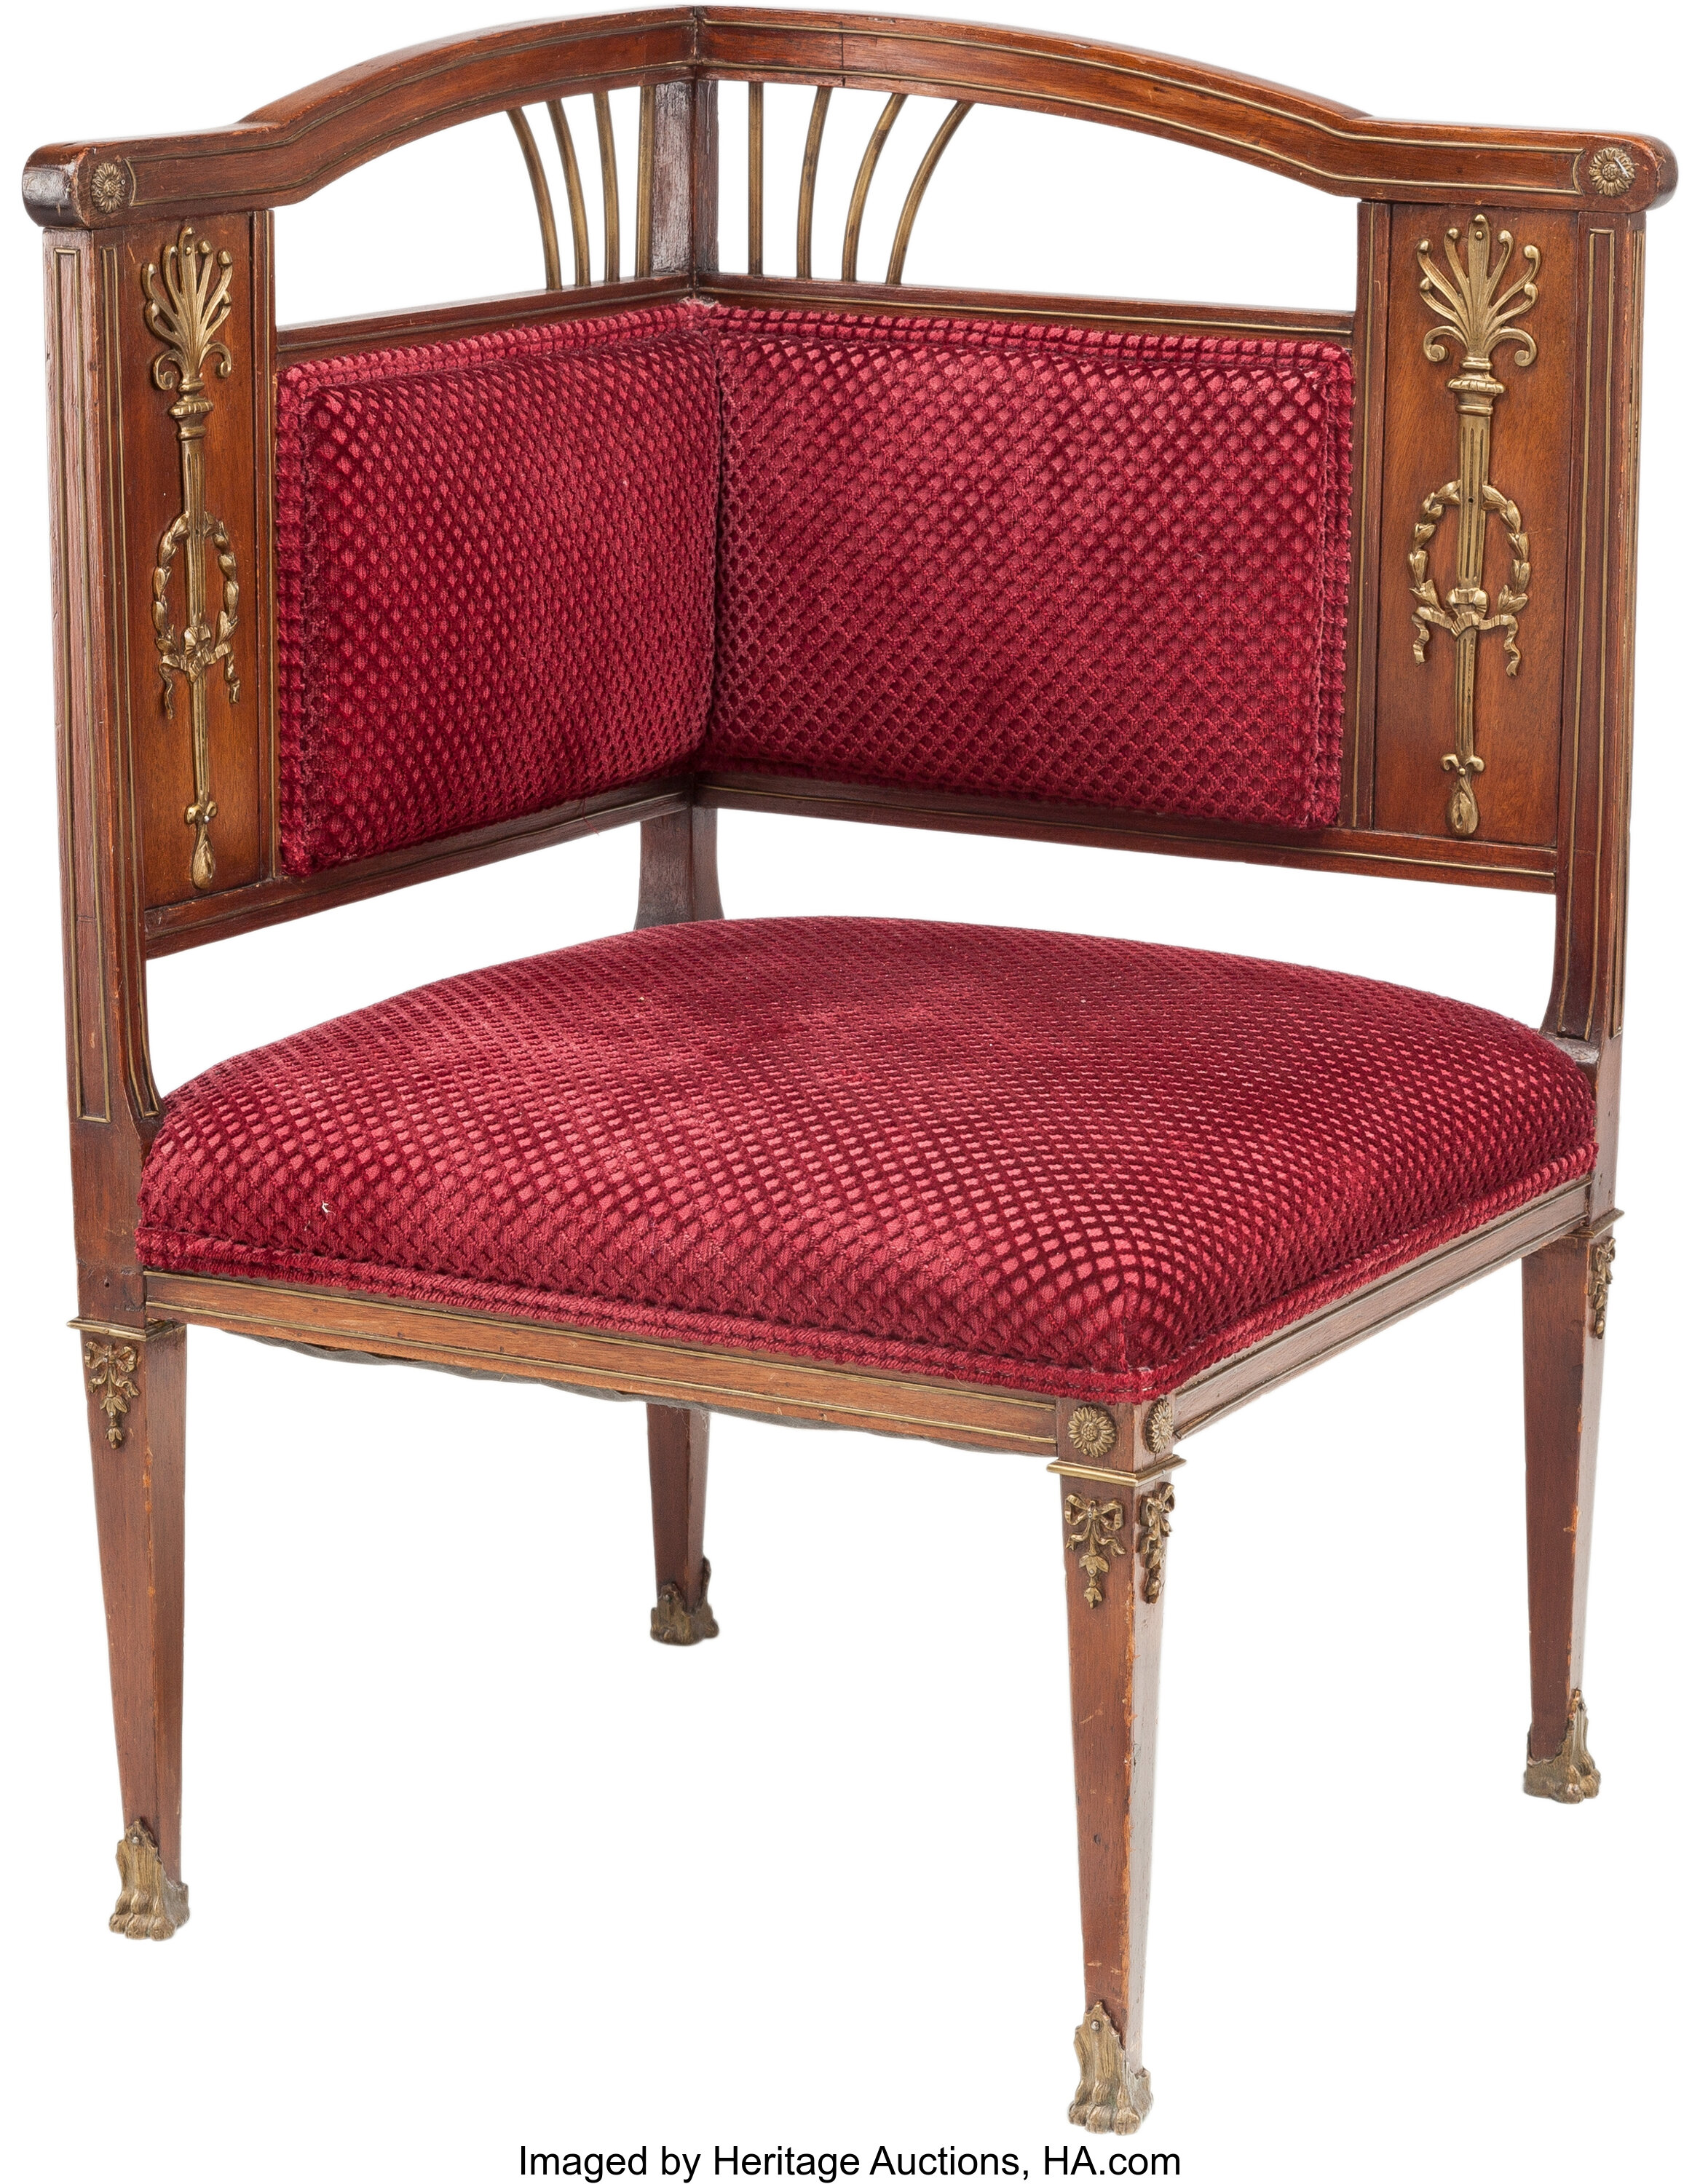 A French Second Empire Mahogany And Gilt Bronze Corner Chair